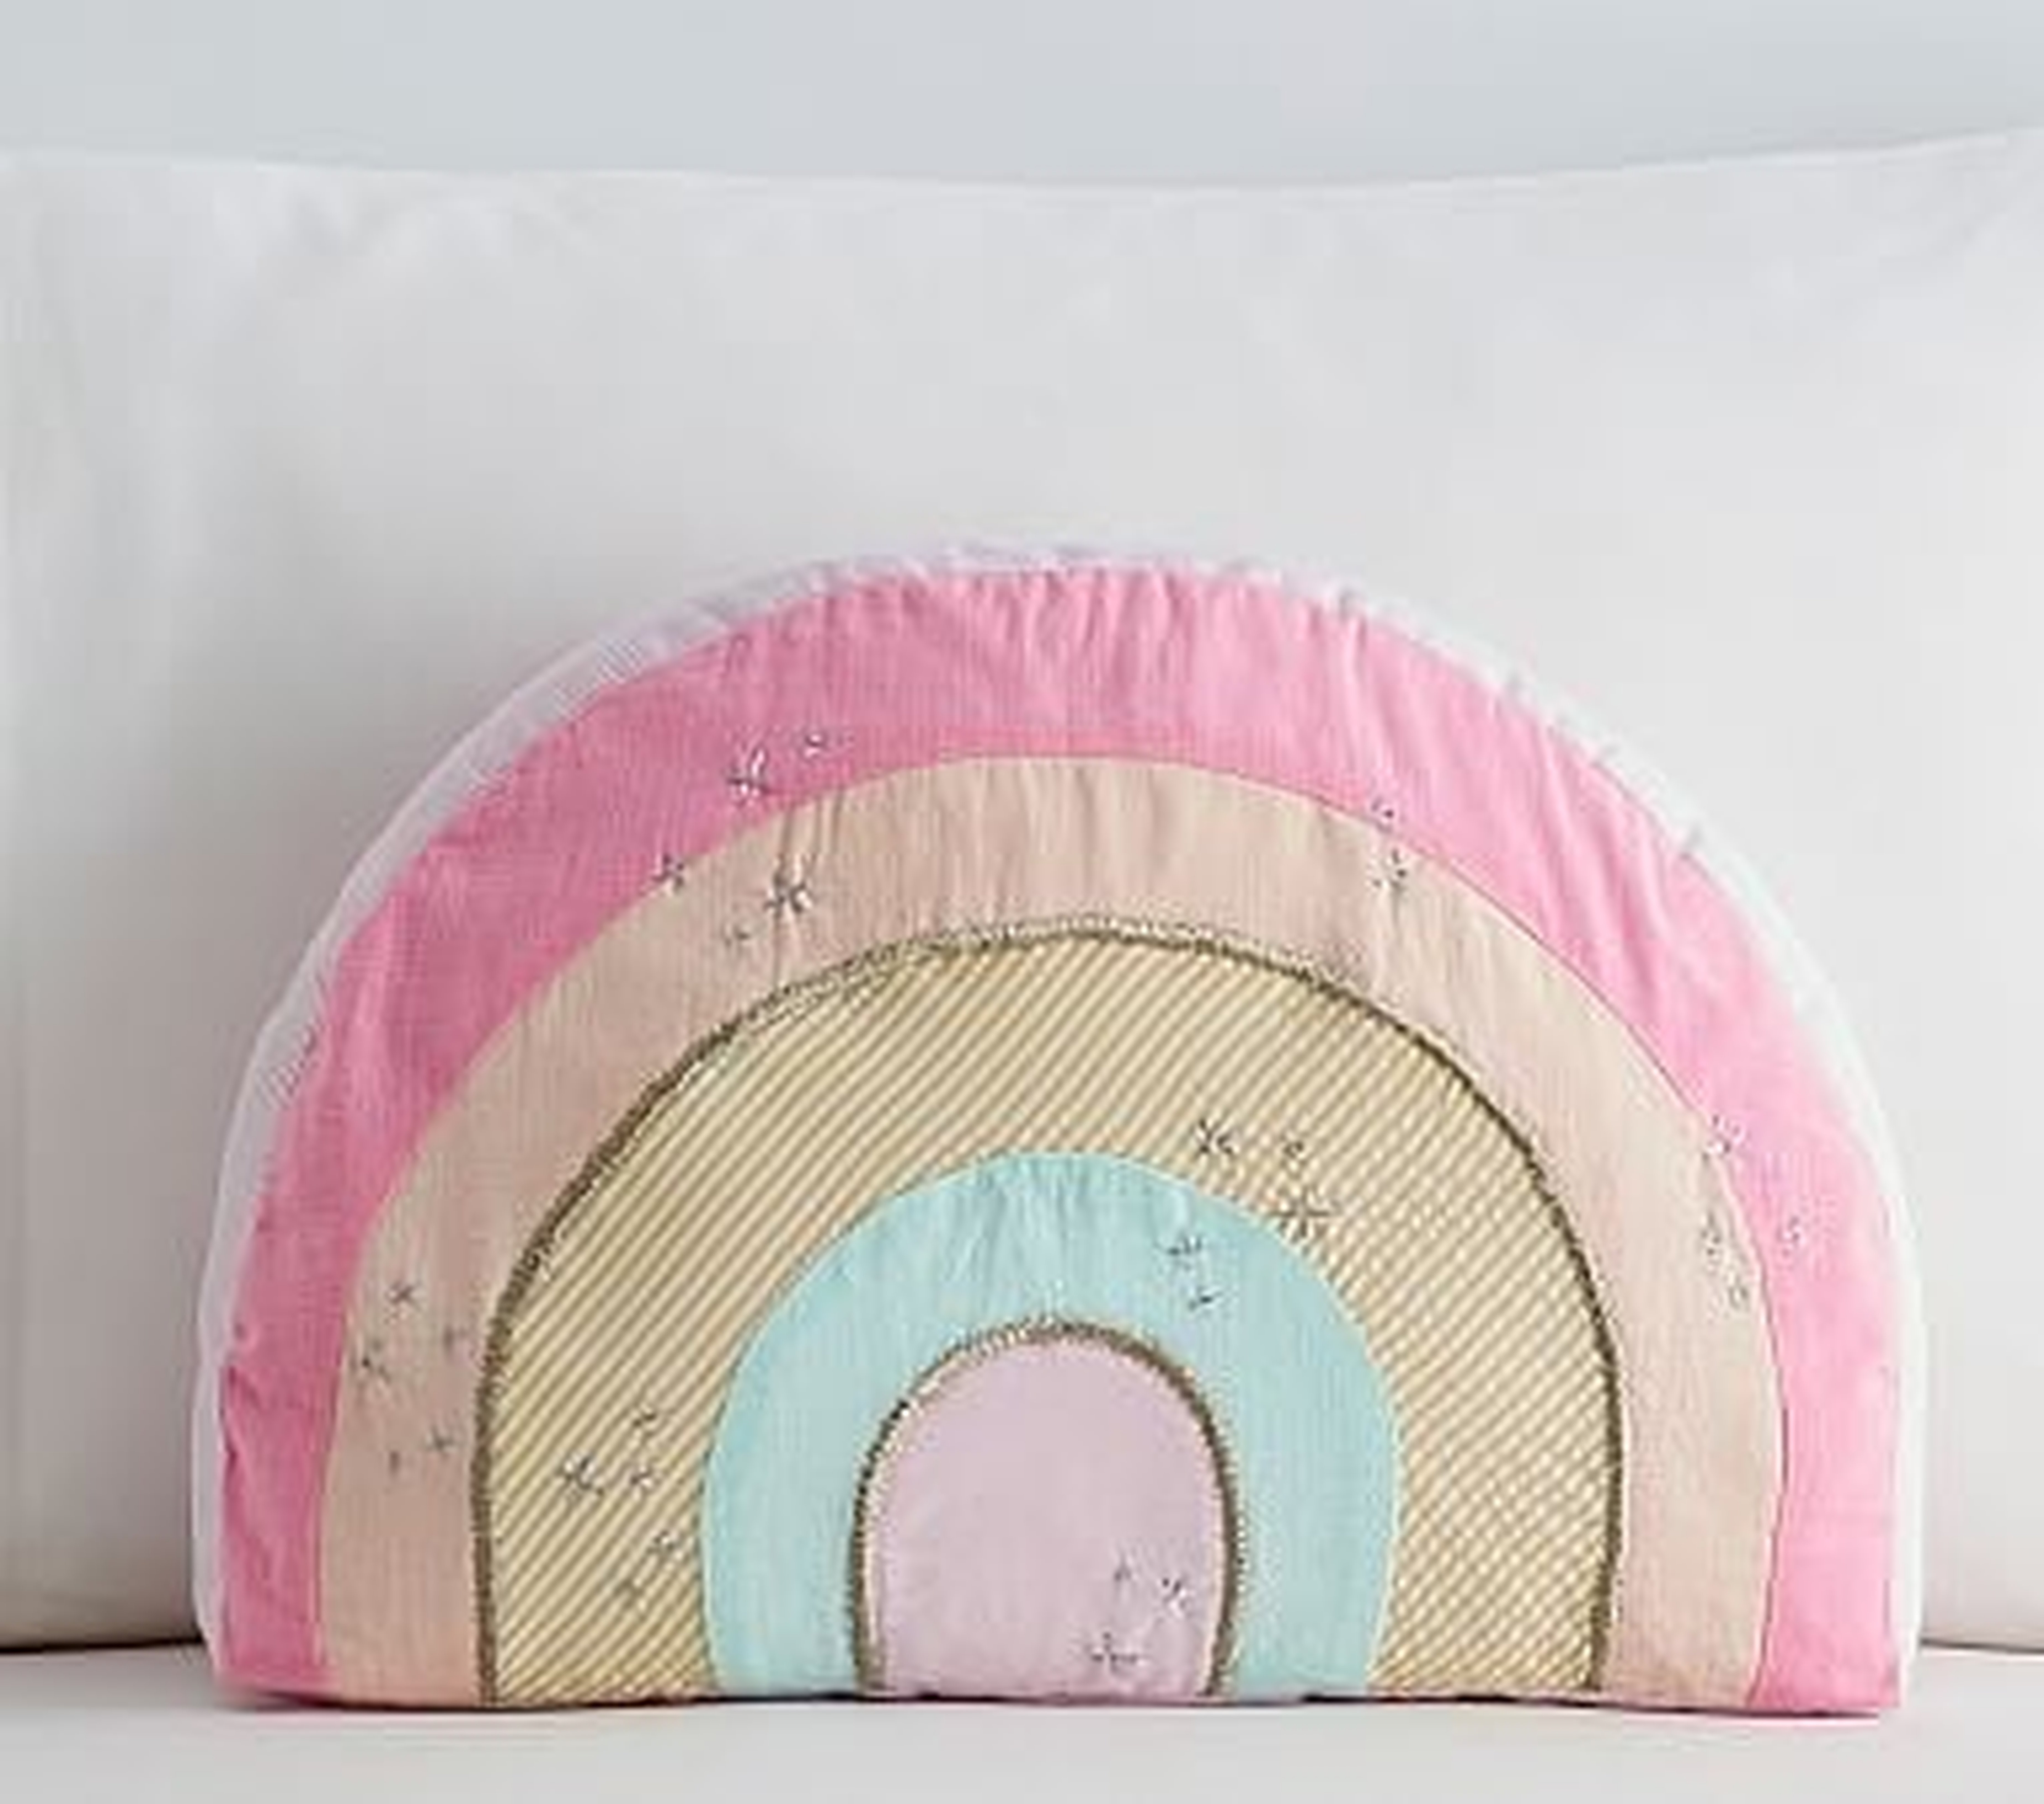 Retro Rainbow Shaped Pillow, 11x16 Inches, Pink Multi - Pottery Barn Kids